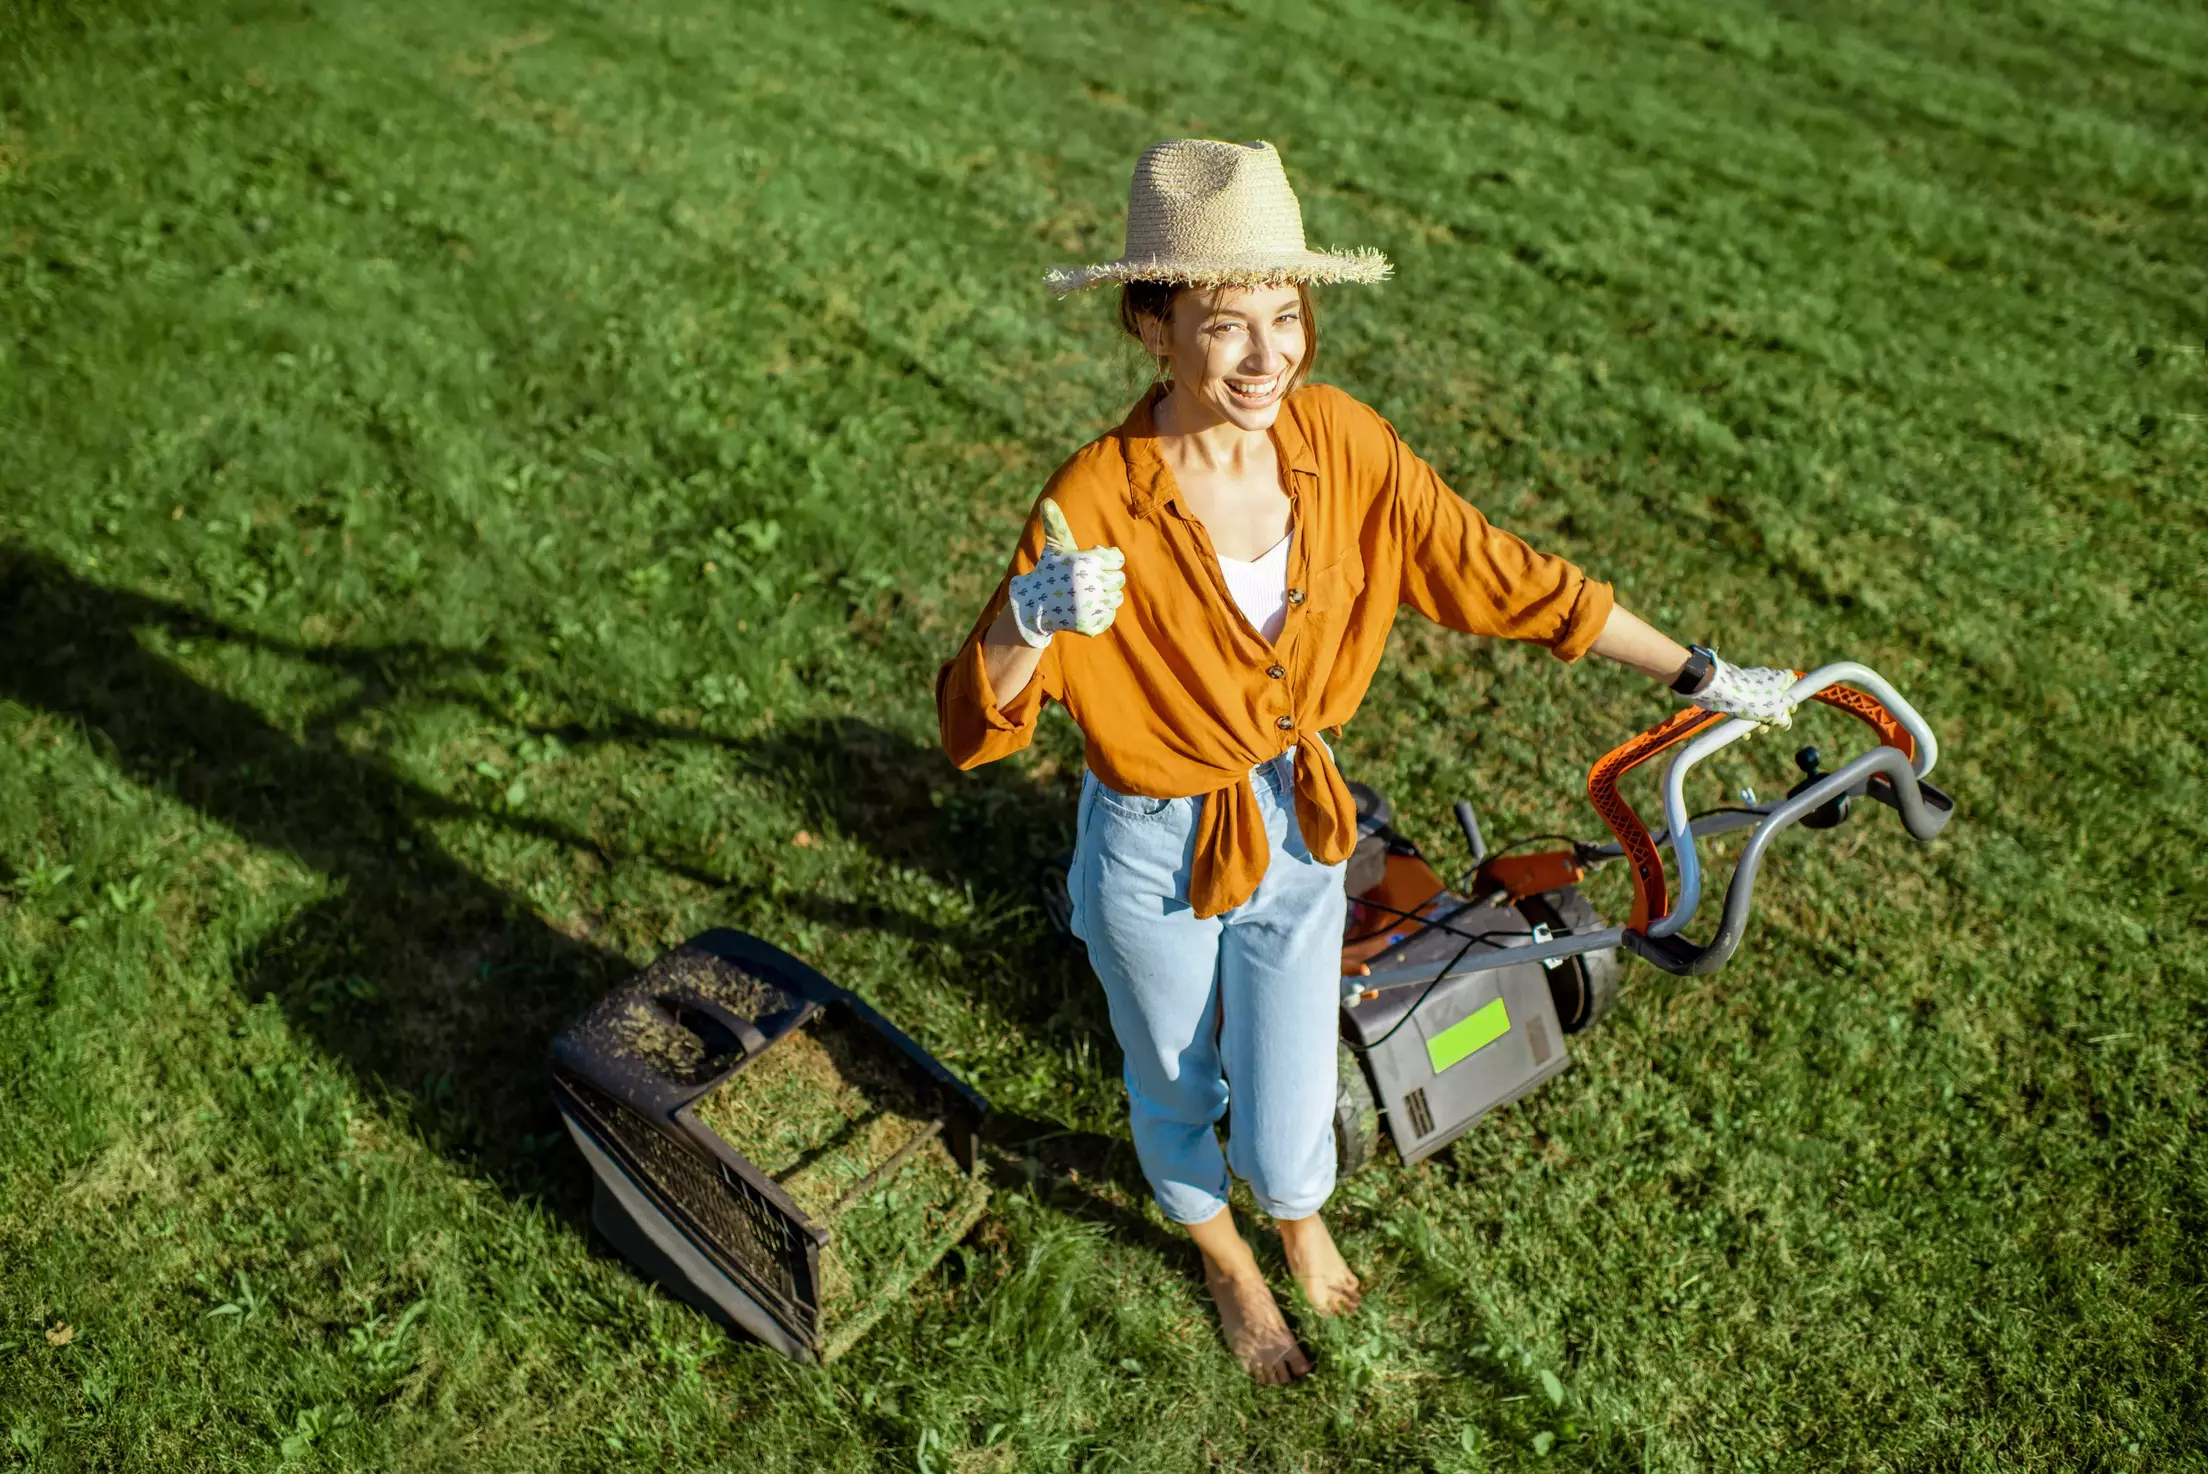 Tips For Lawn Mower Safety